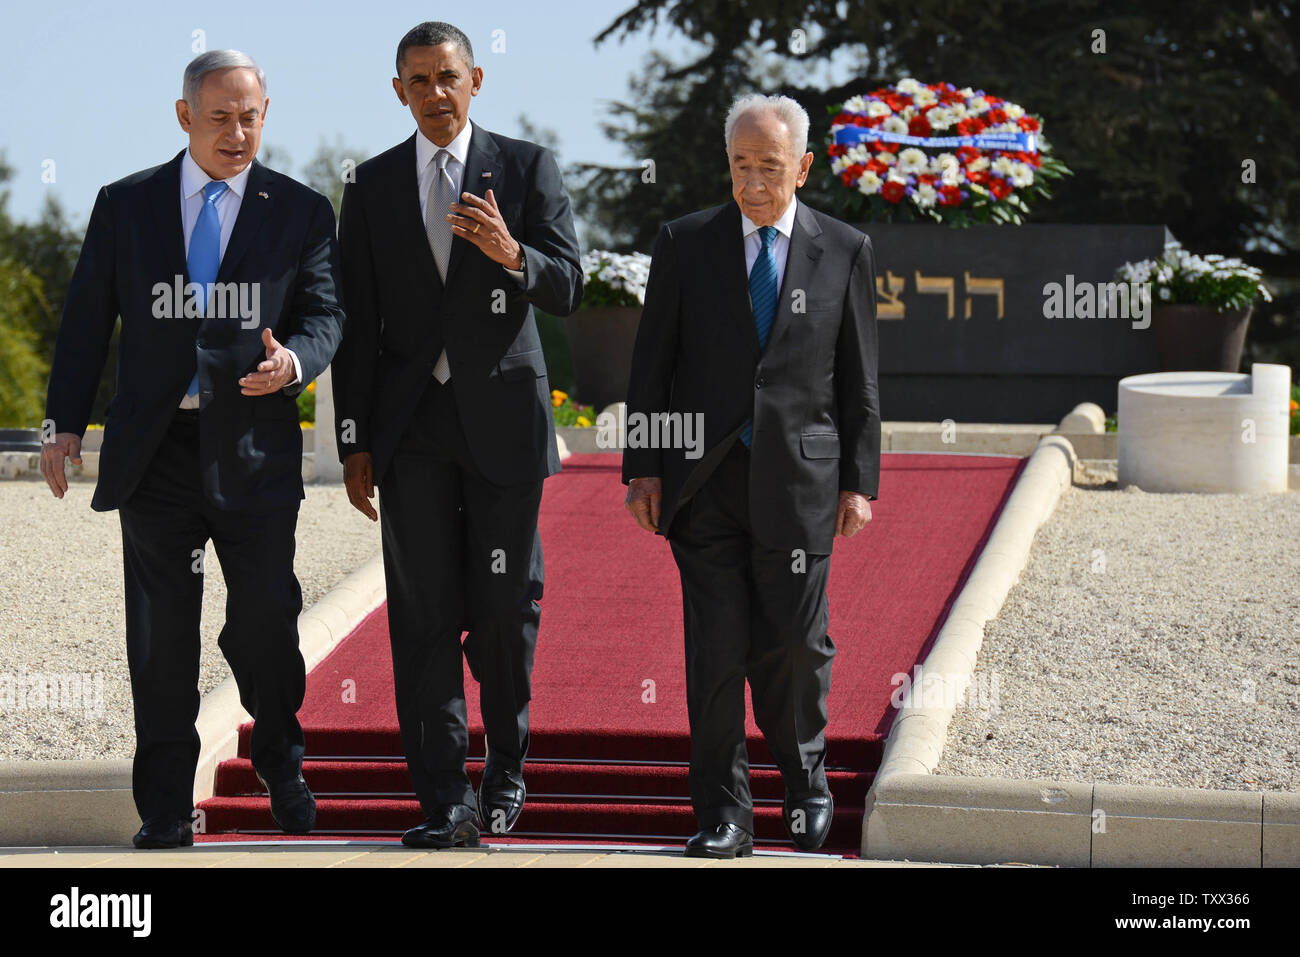 U.S. President Barack Obama walks with Israeli President Shimon Peres and Prime Minister Benjamin Netanyahu (L) during a visit to Mount Herzl on the west side of Jerusalem, Israel on March 22, 2013.  Theodor Herzl was the founder of the modern Zionist movement.  Obama is in the final day of his three-day visit to Israel and the Palestinian Territories.   UPI/Kobi Gideon/GPO Stock Photo